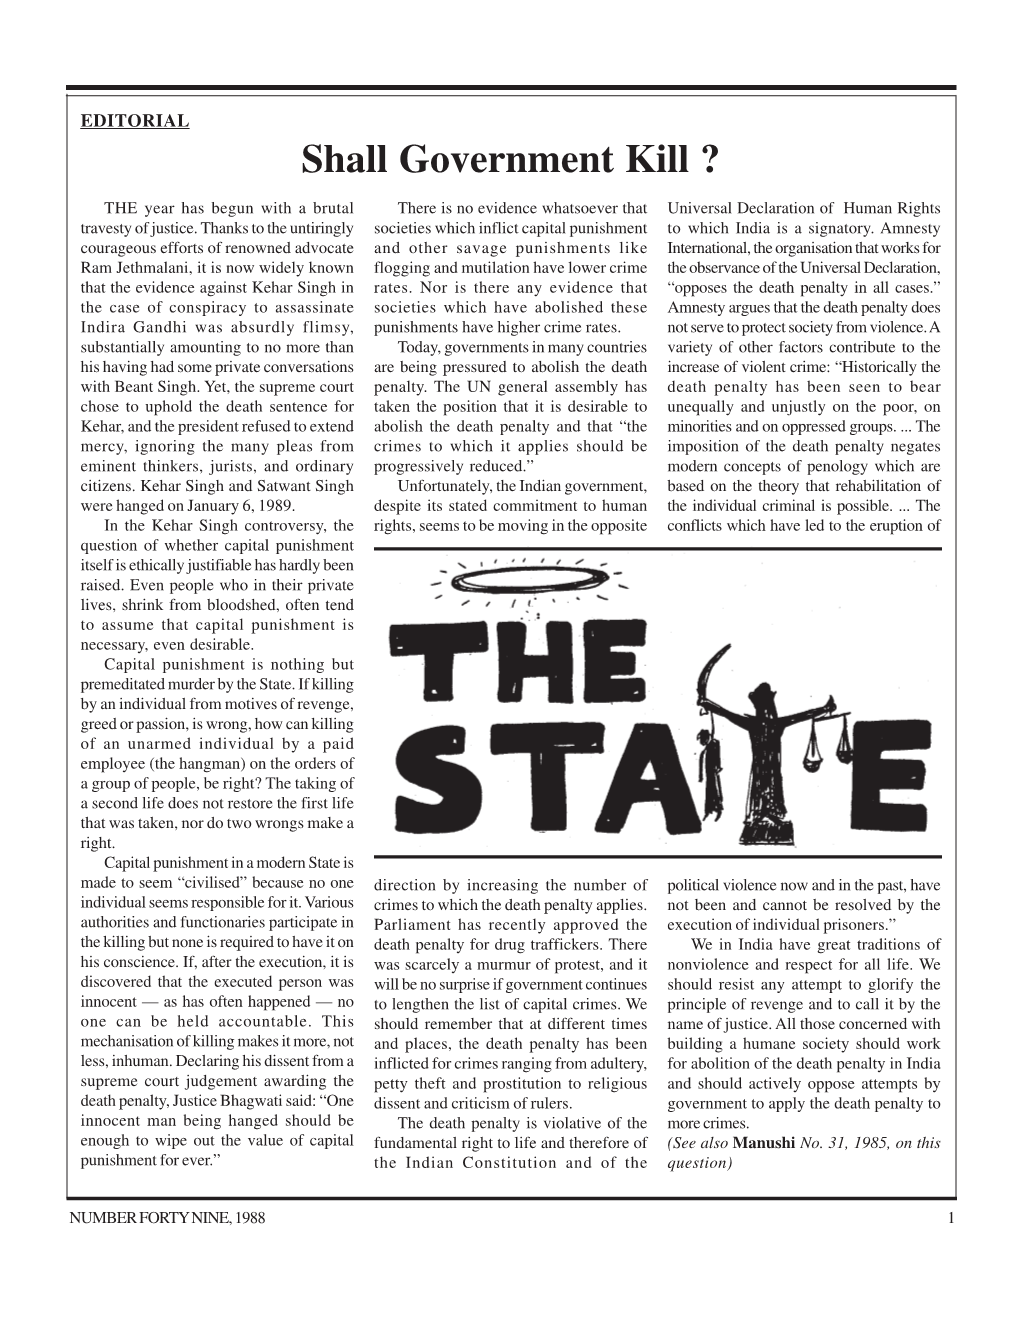 2 EDITORIAL, Shall Government Kill.Pmd